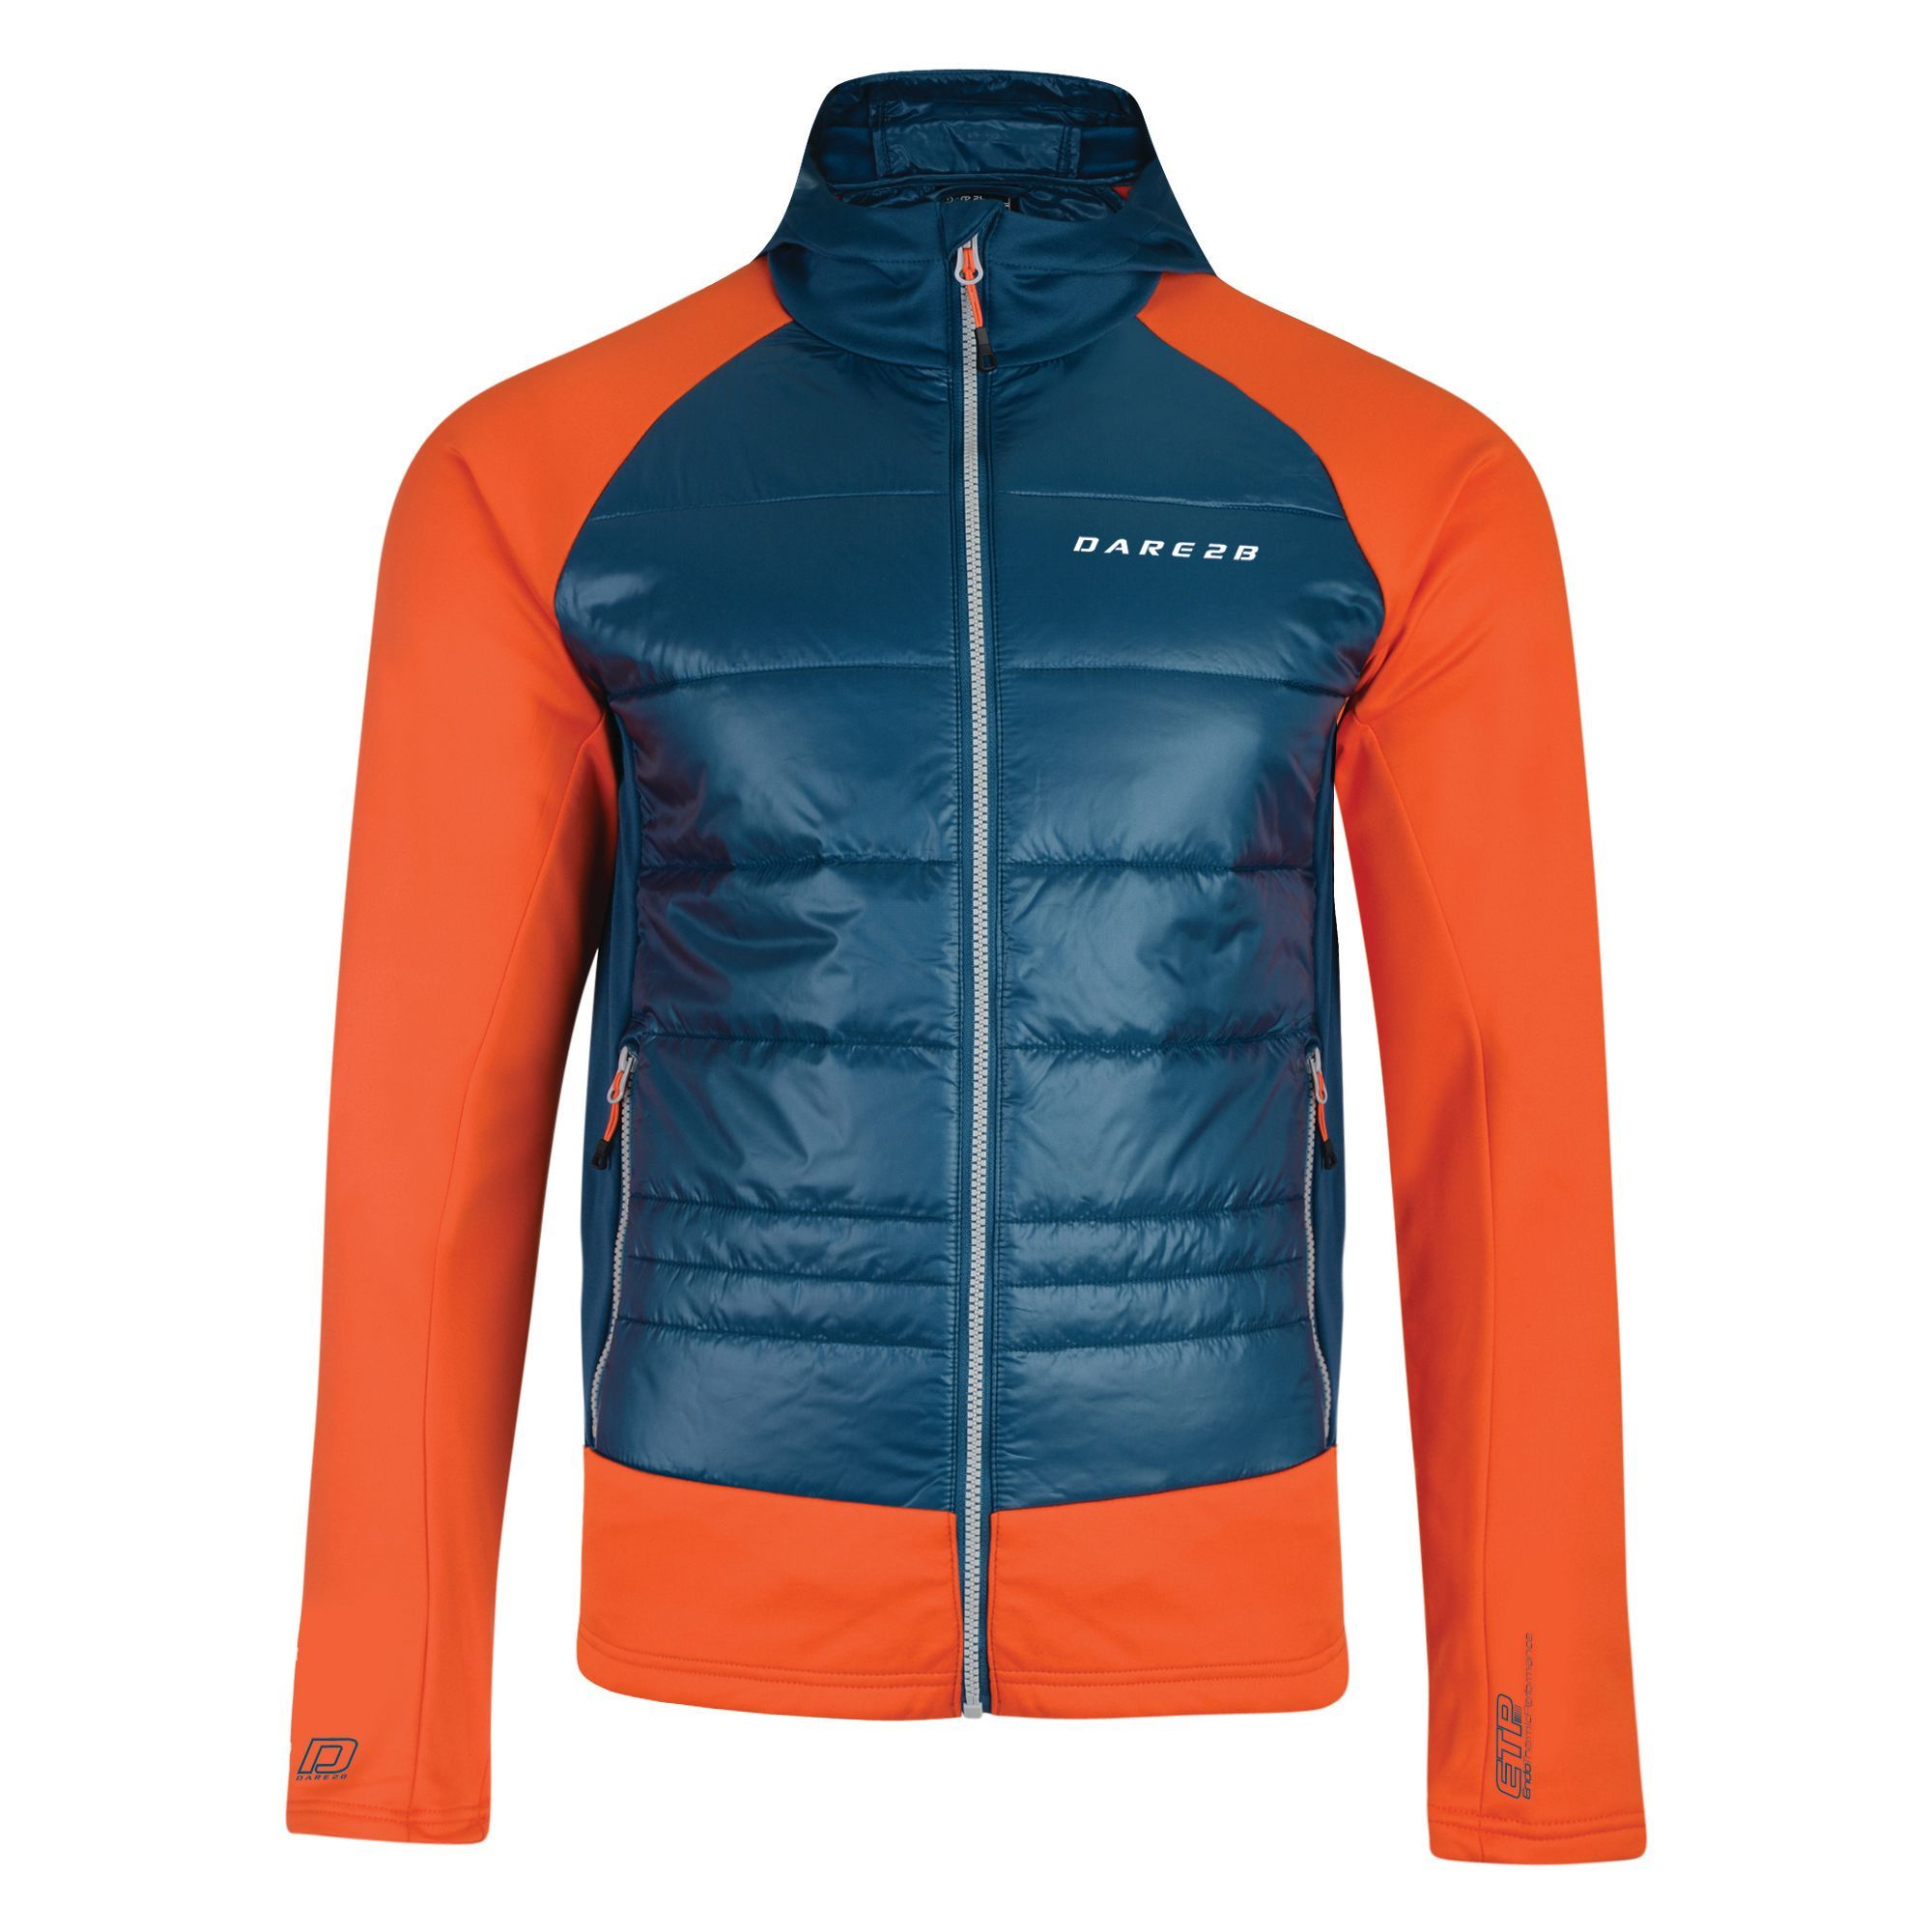 Inlay Hybrid jacket. EndoThermic Performance (ETP). Ilus Hybrid Microwarmth with polyester ripstop and core stretch mix. Alpaca wool mix insulation. Natural wicking and  odour control properties. Grown on hood. 2 x lower zip pockets. Materials: 100% Polyester.